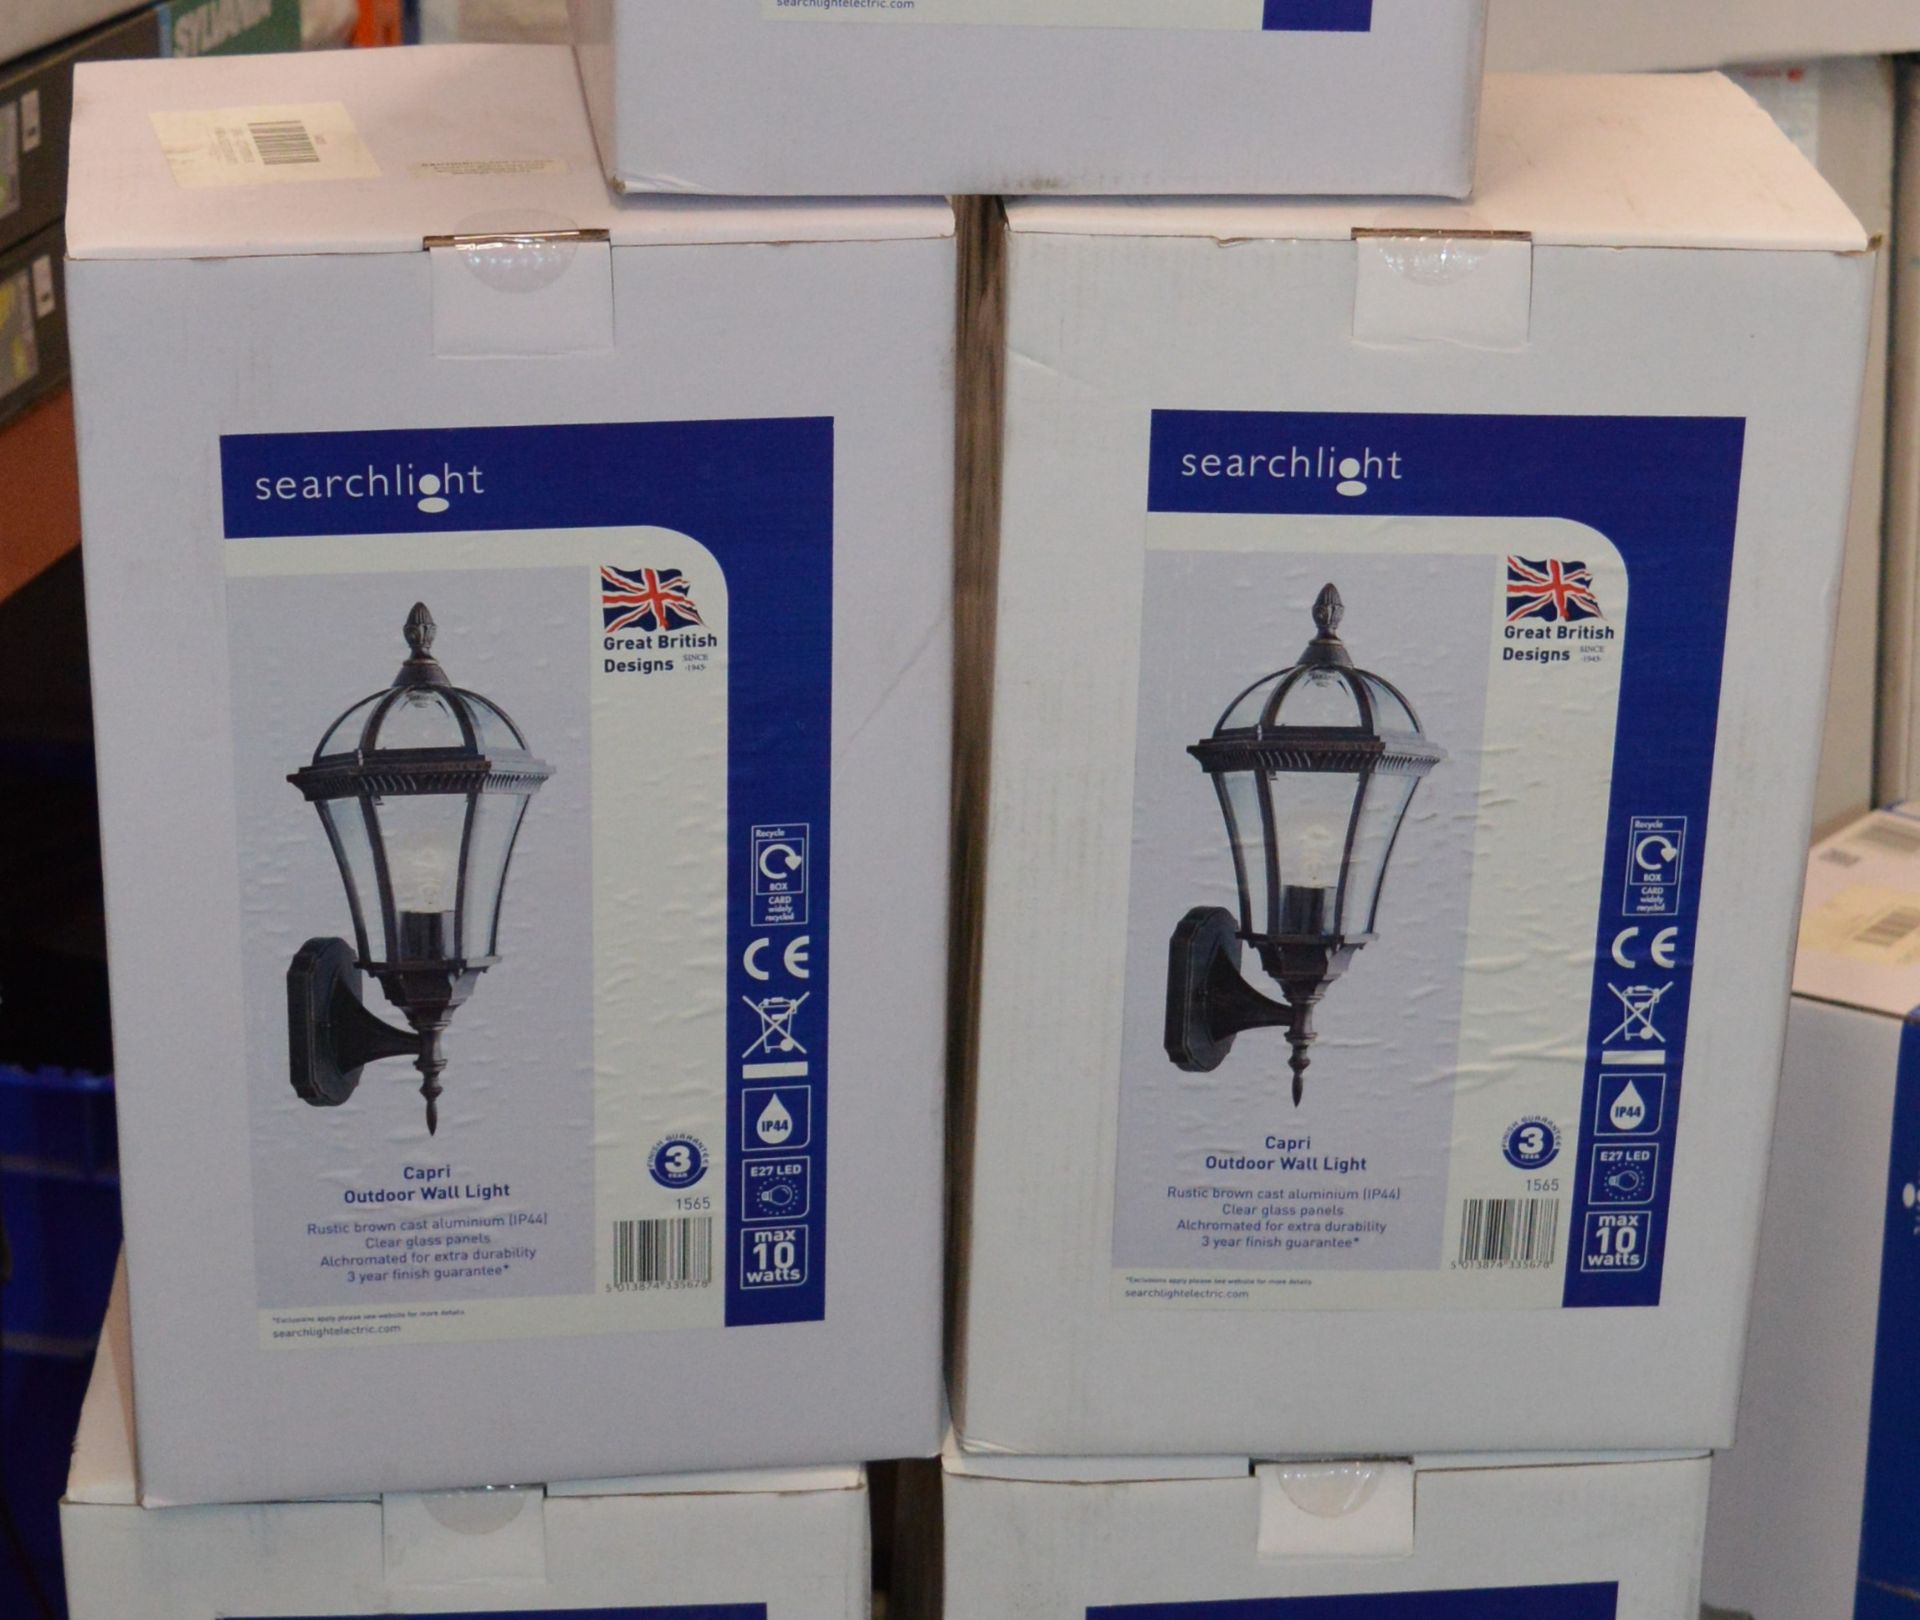 2 x Searchlight Capri Outdoor Wall Lights - Rustic Brown Cast Aluminium IP44 Product Code 1565 - New - Image 2 of 3